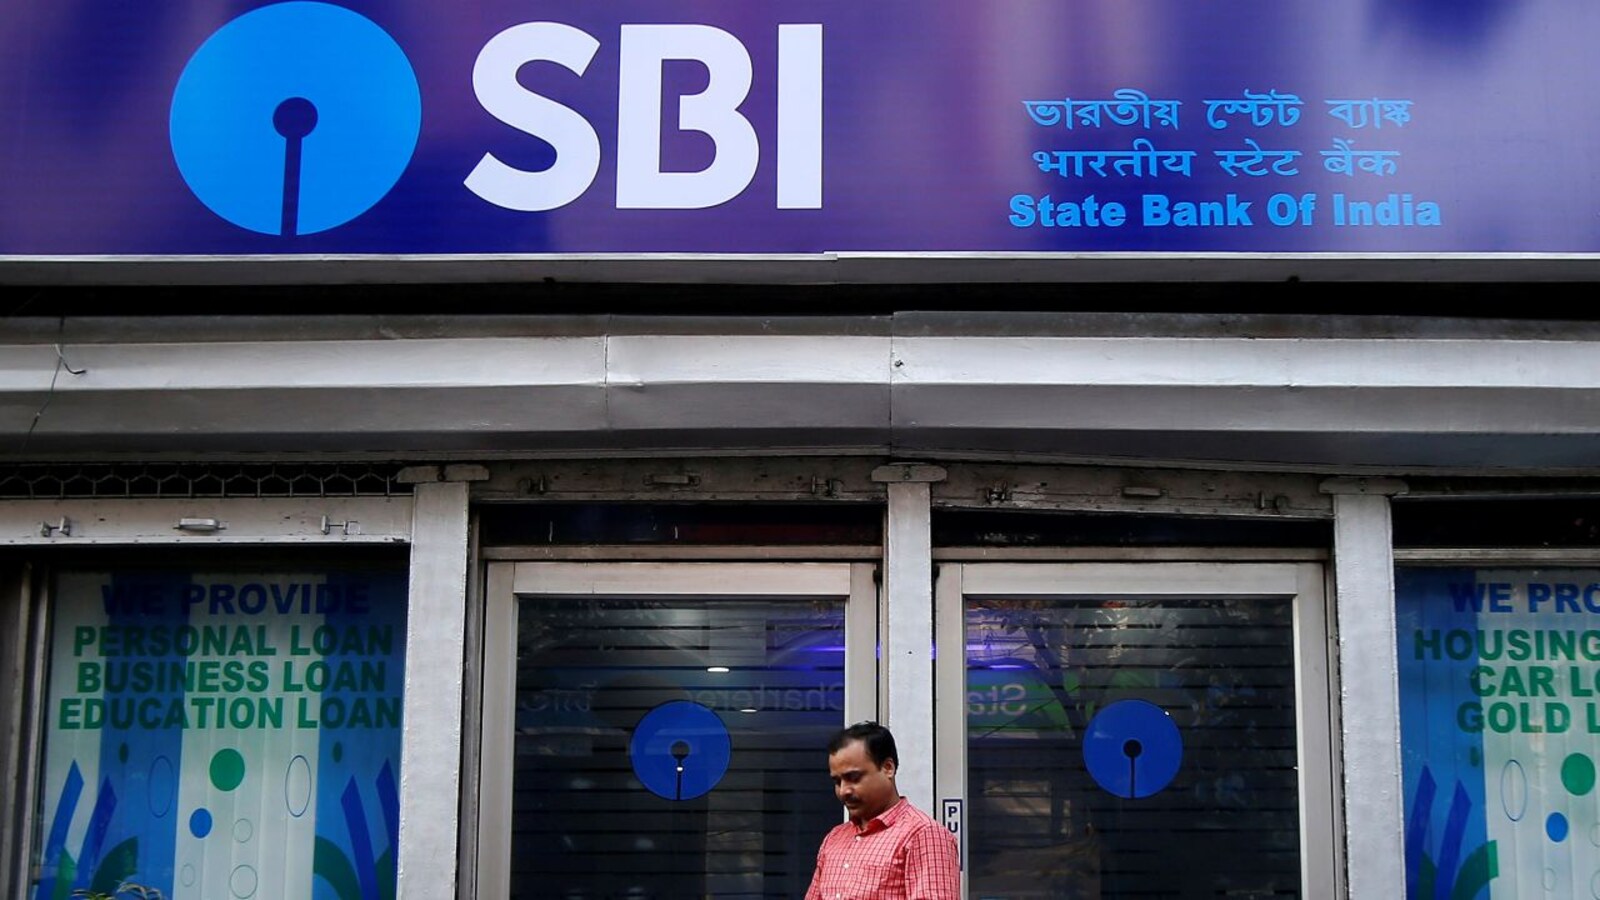 SBI online banking: Check out these 6 tips from India's largest bank